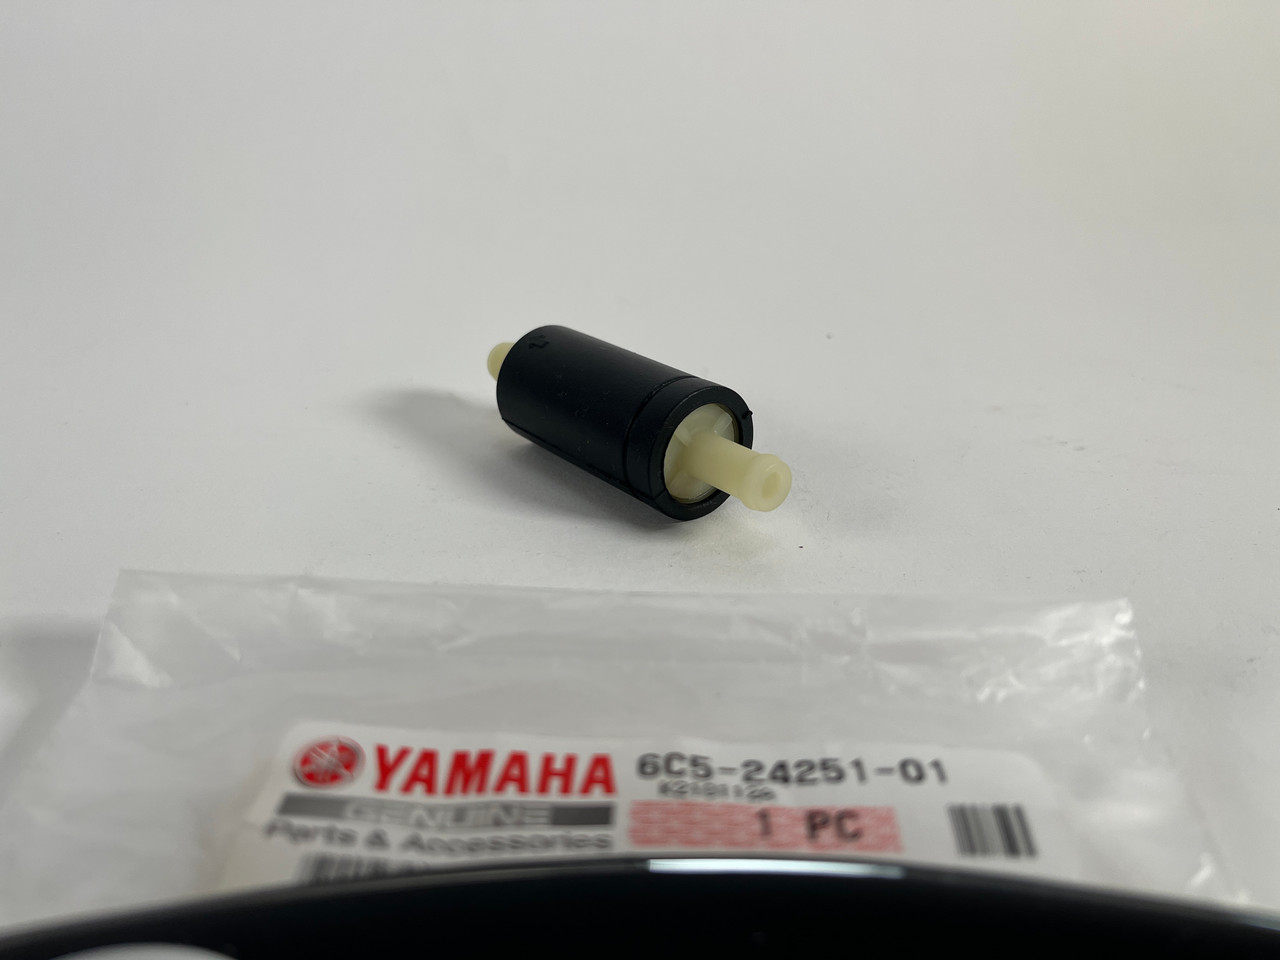 $24.99* GENUINE YAMAHA no tax* STRAINER 1 6C5-24251-01-00  *In Stock & Ready To Ship!